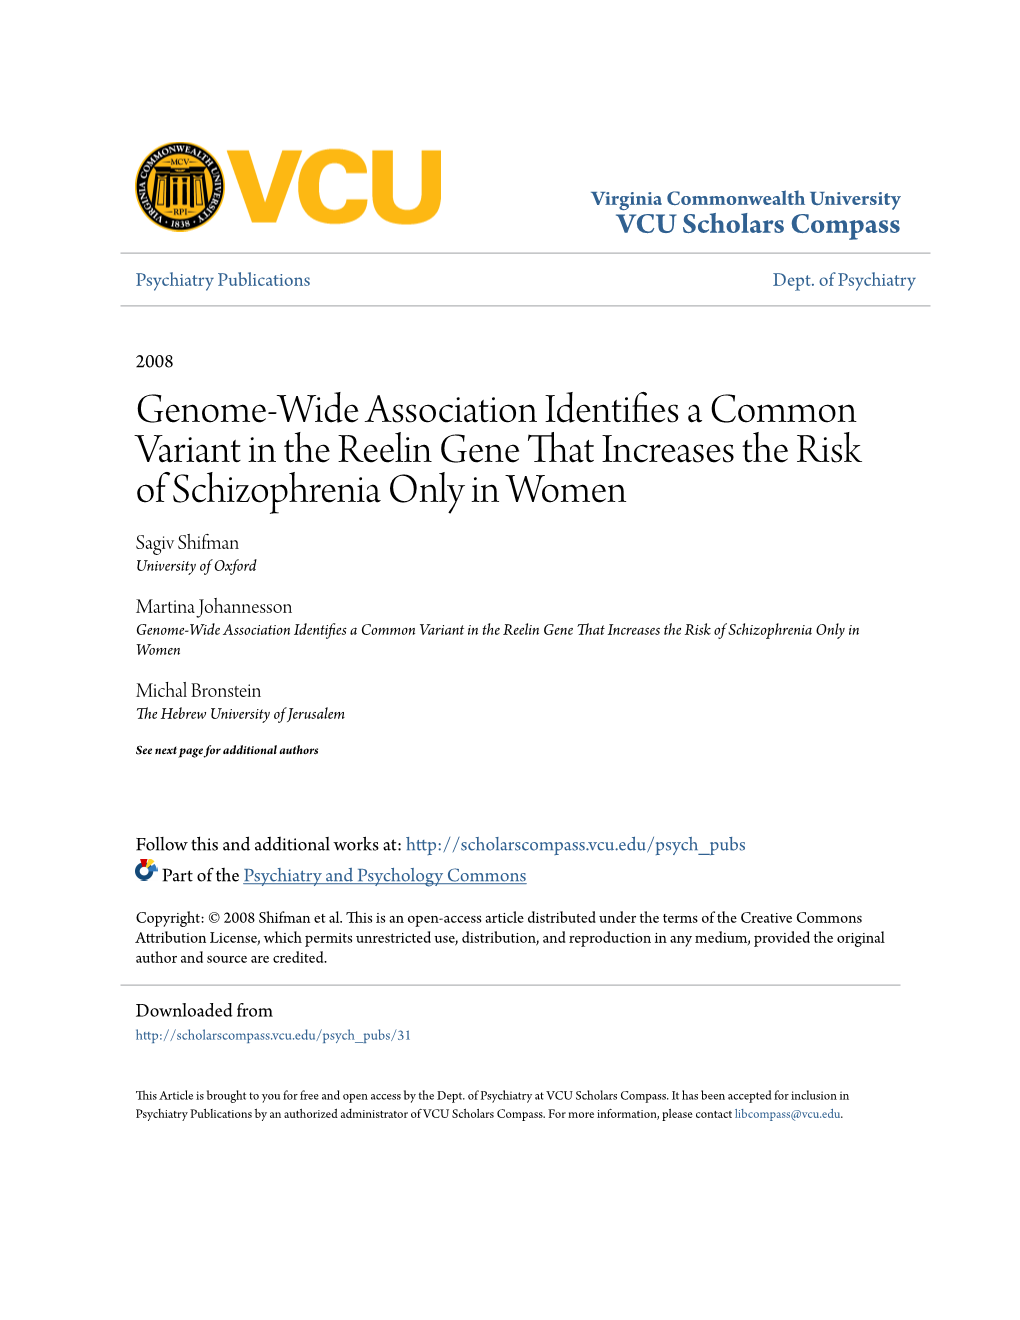 Genome-Wide Association Identifies a Common Variant in the Reelin Gene That Increases the Risk of Schizophrenia Only in Women